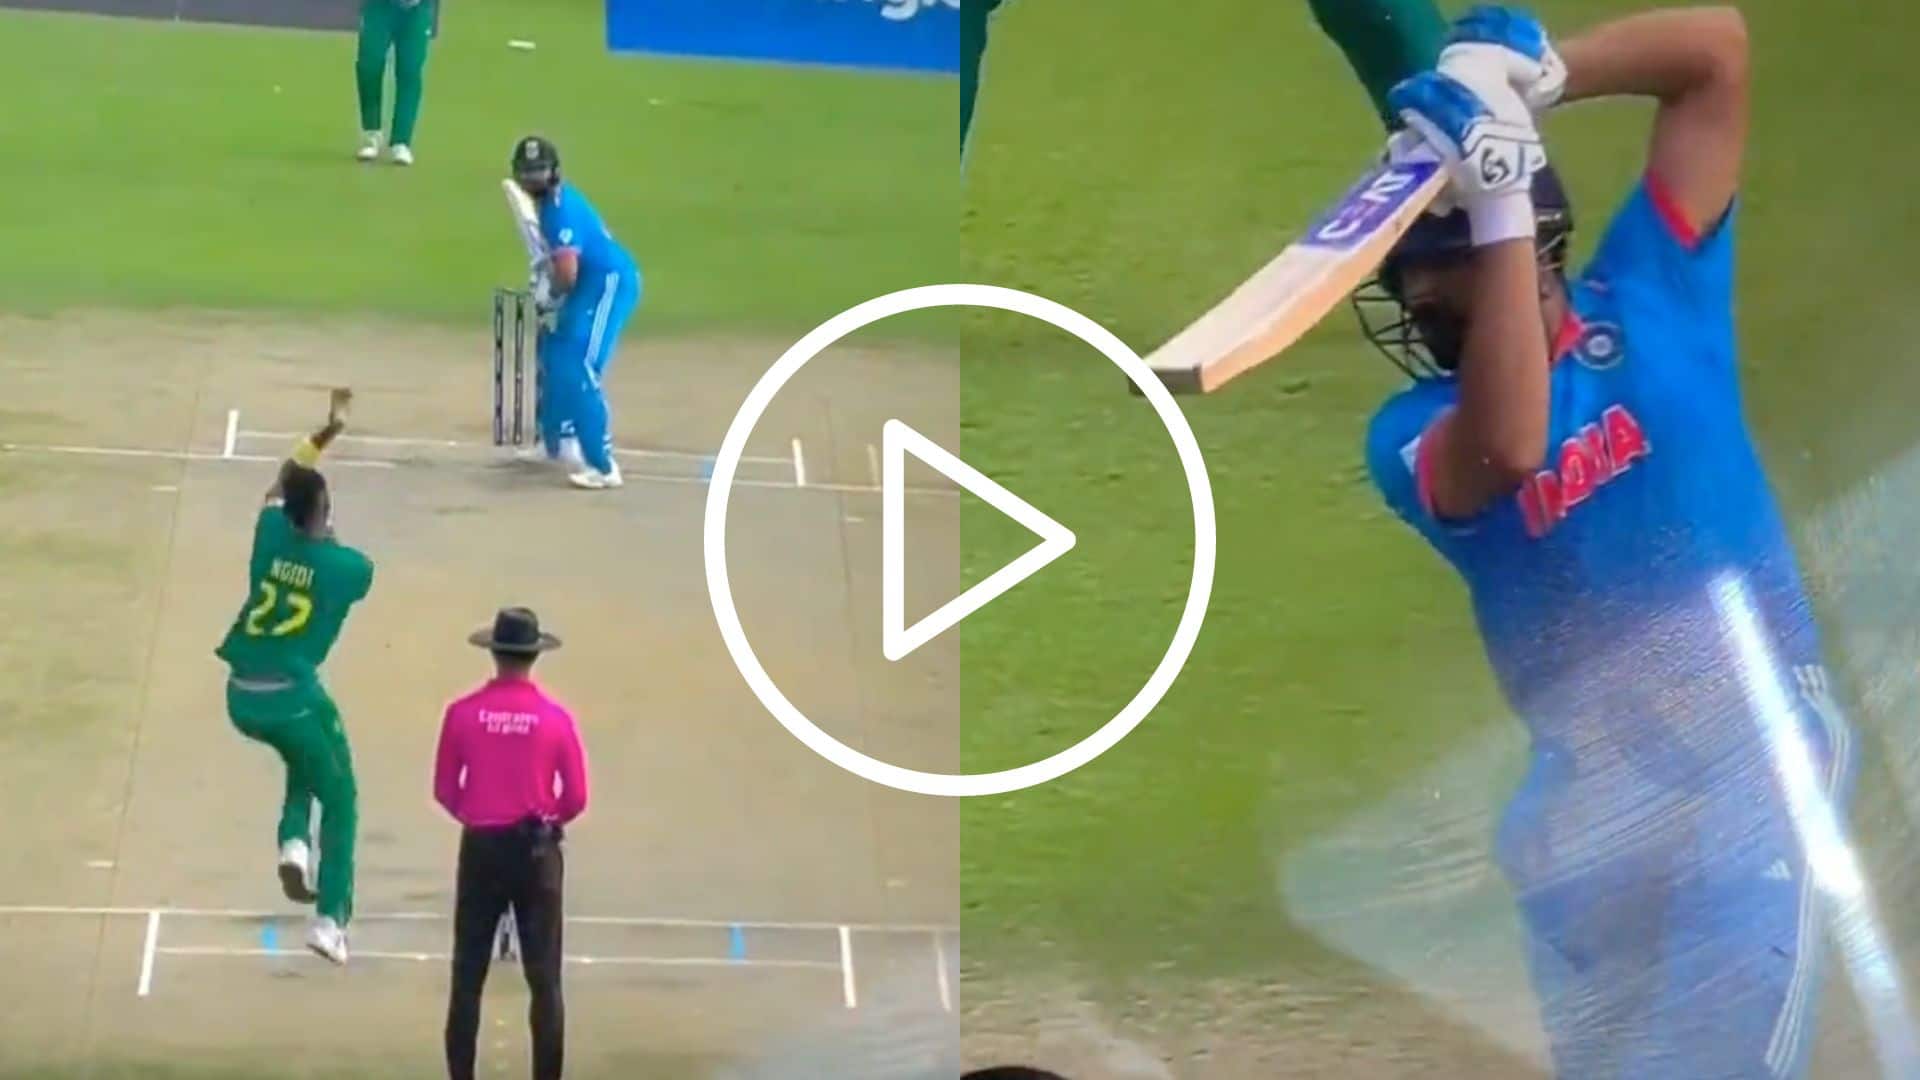 [Watch] Rohit Sharma ‘Holding His Pose’ After 'Glorious' Cover Drive For Four